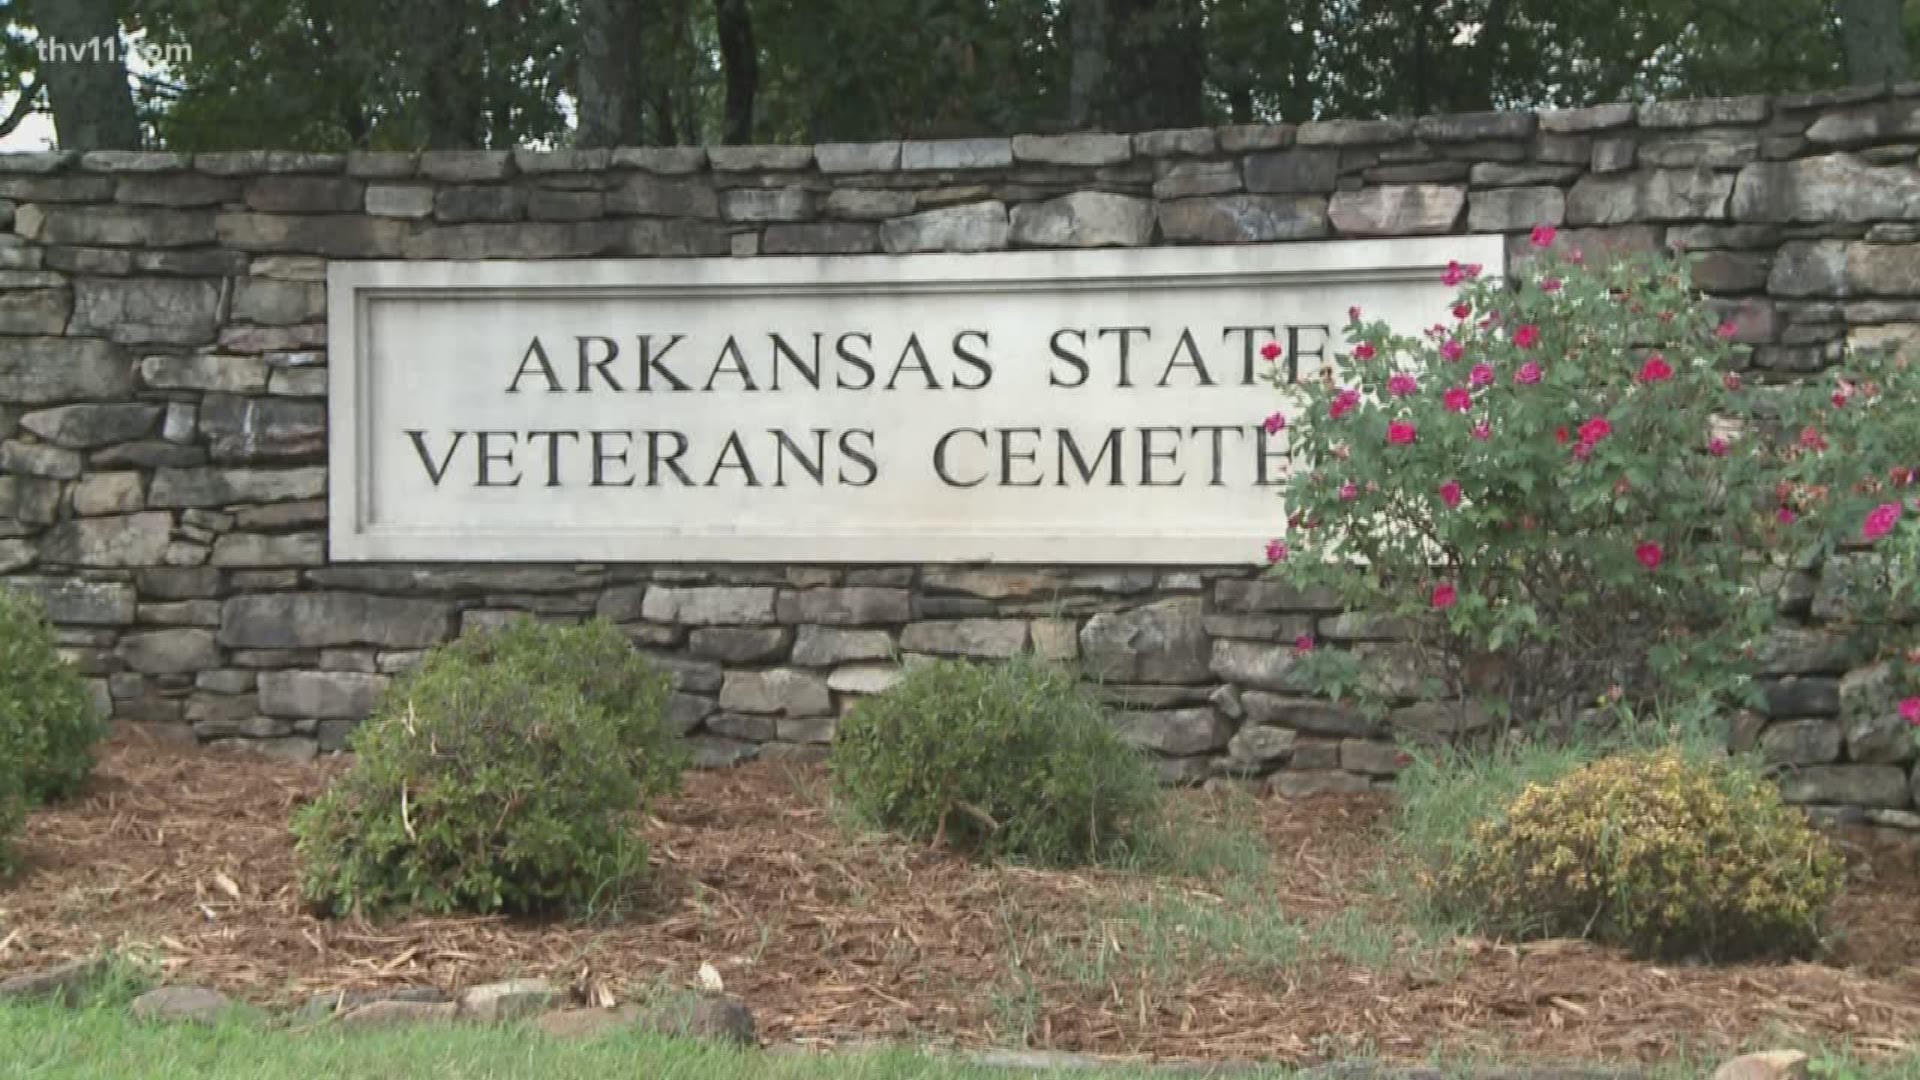 The Arkansas Veterans Cemetery in North Little Rock has been awarded a $5.7 million dollar grant. Assistant Director of the Cemetery William Wussick said they first plan to expand the committal shelter.